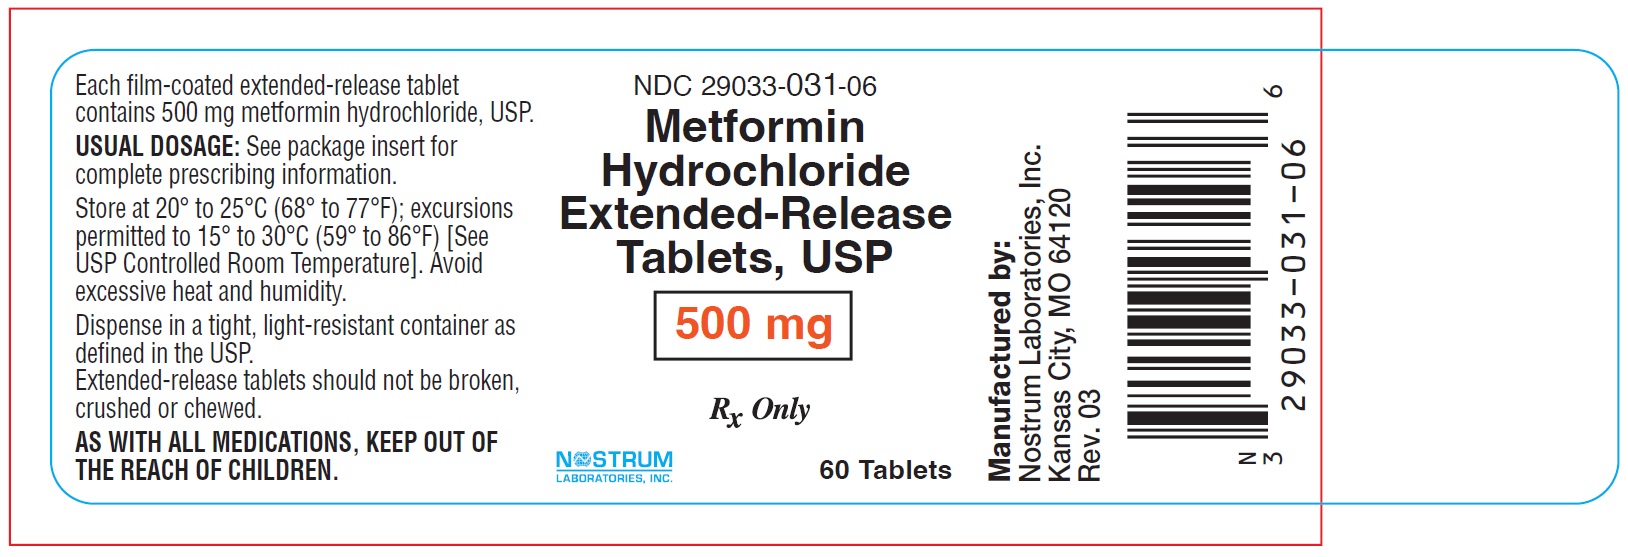 NDC 29033-031-06 Metformin hydrochloride extended-release tablets 500 mg/tablet 60 TABLETS Rx only